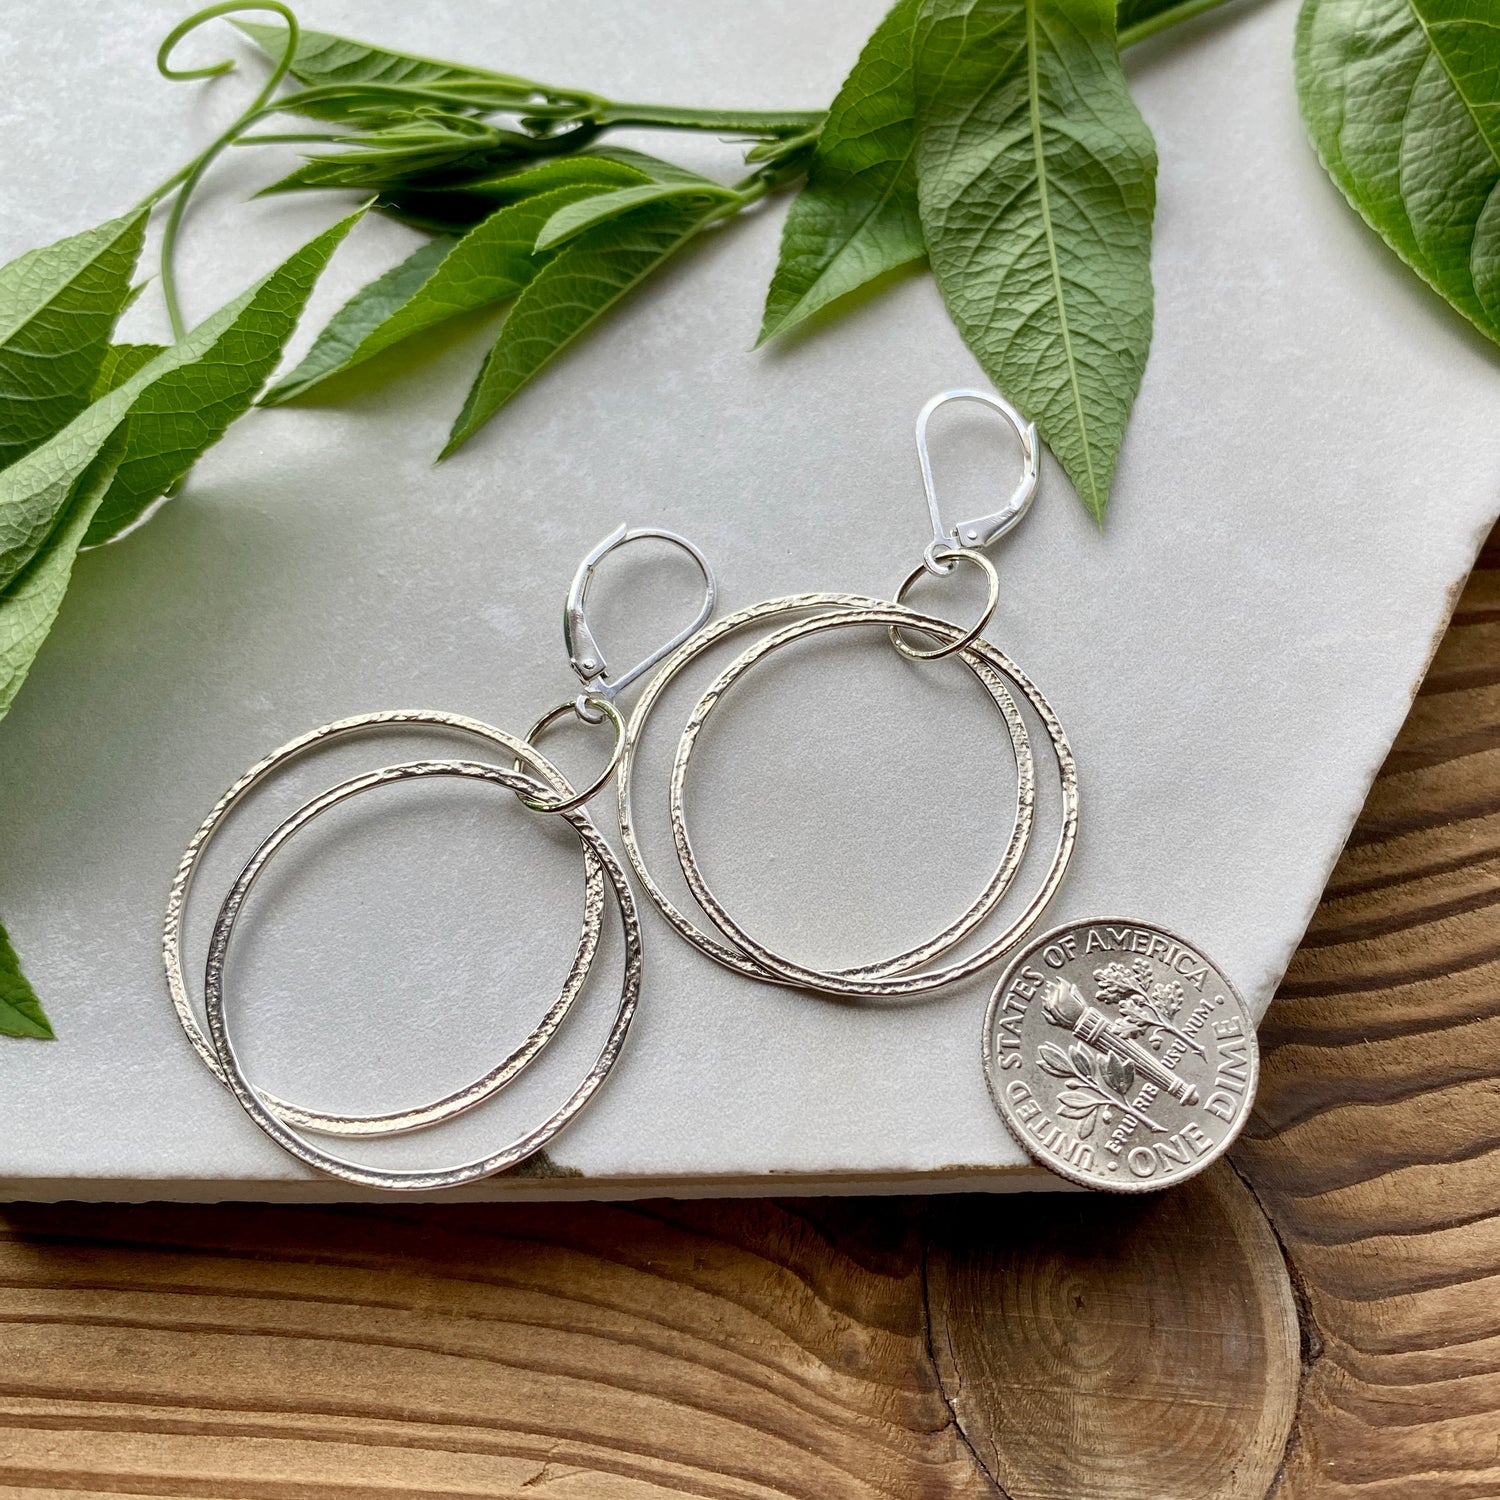 size reference for hoop earrings from Amy Friend